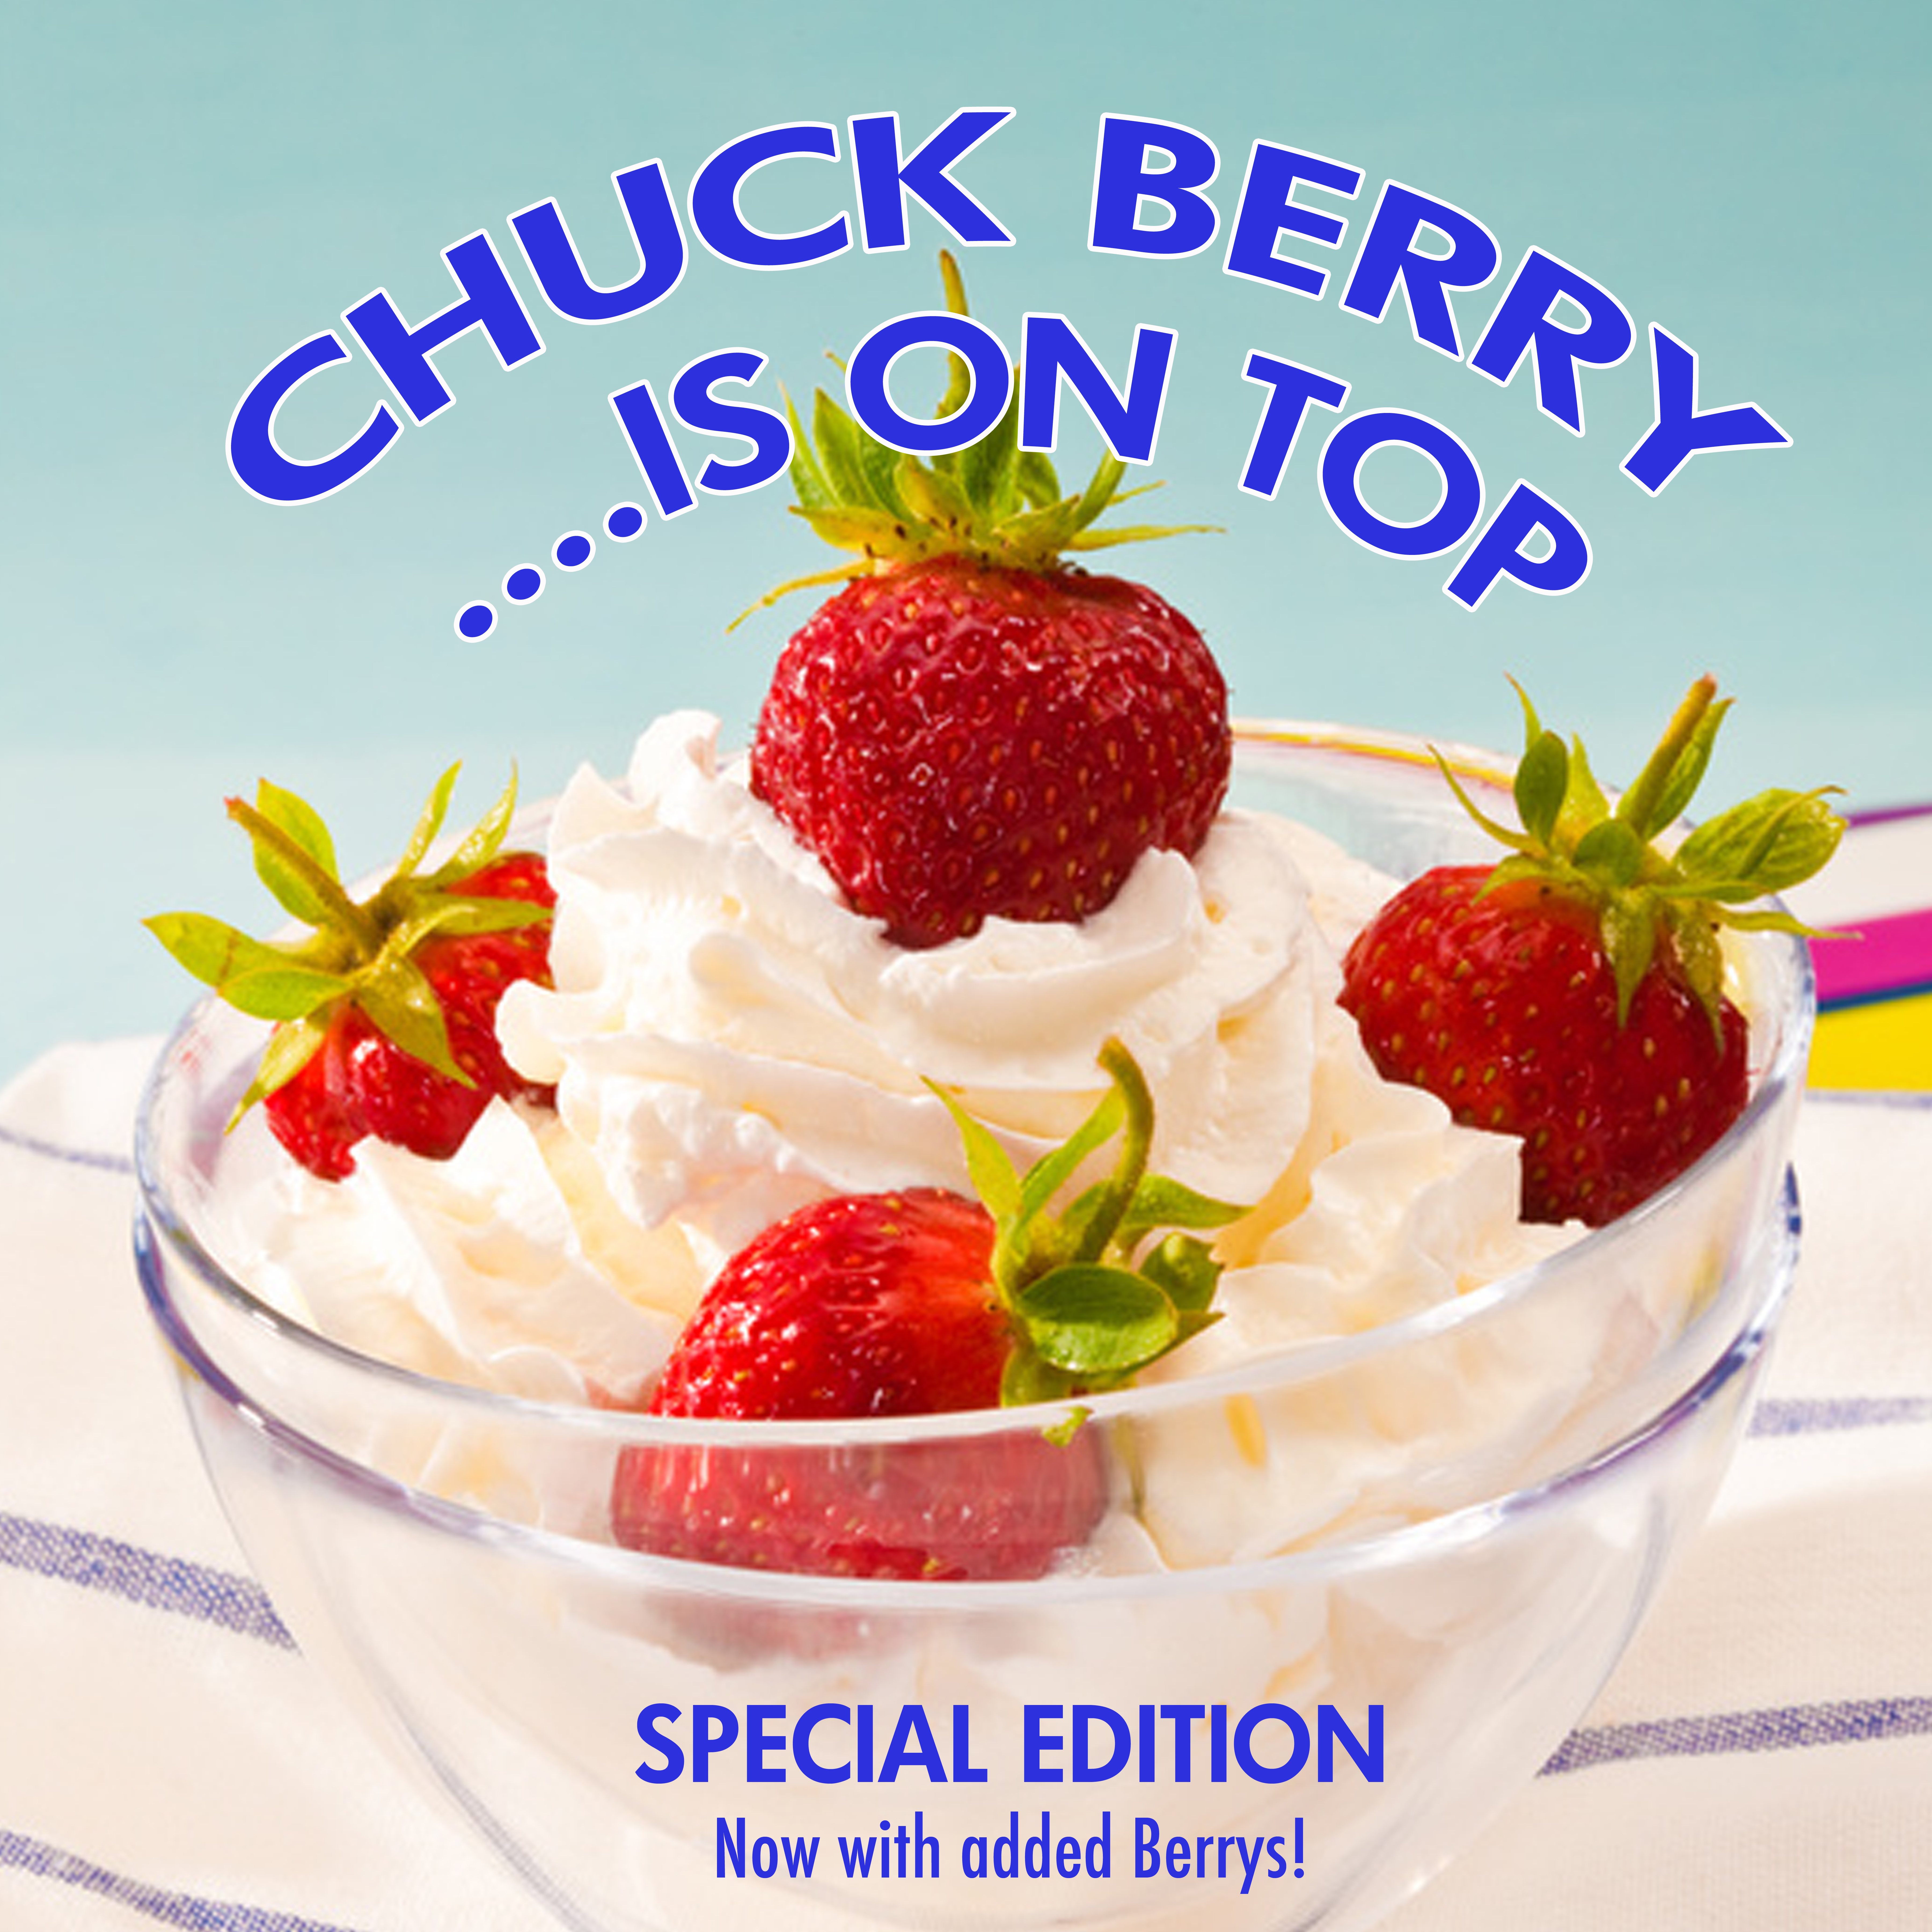 Chuck Berry Is On Top (Special Edition)